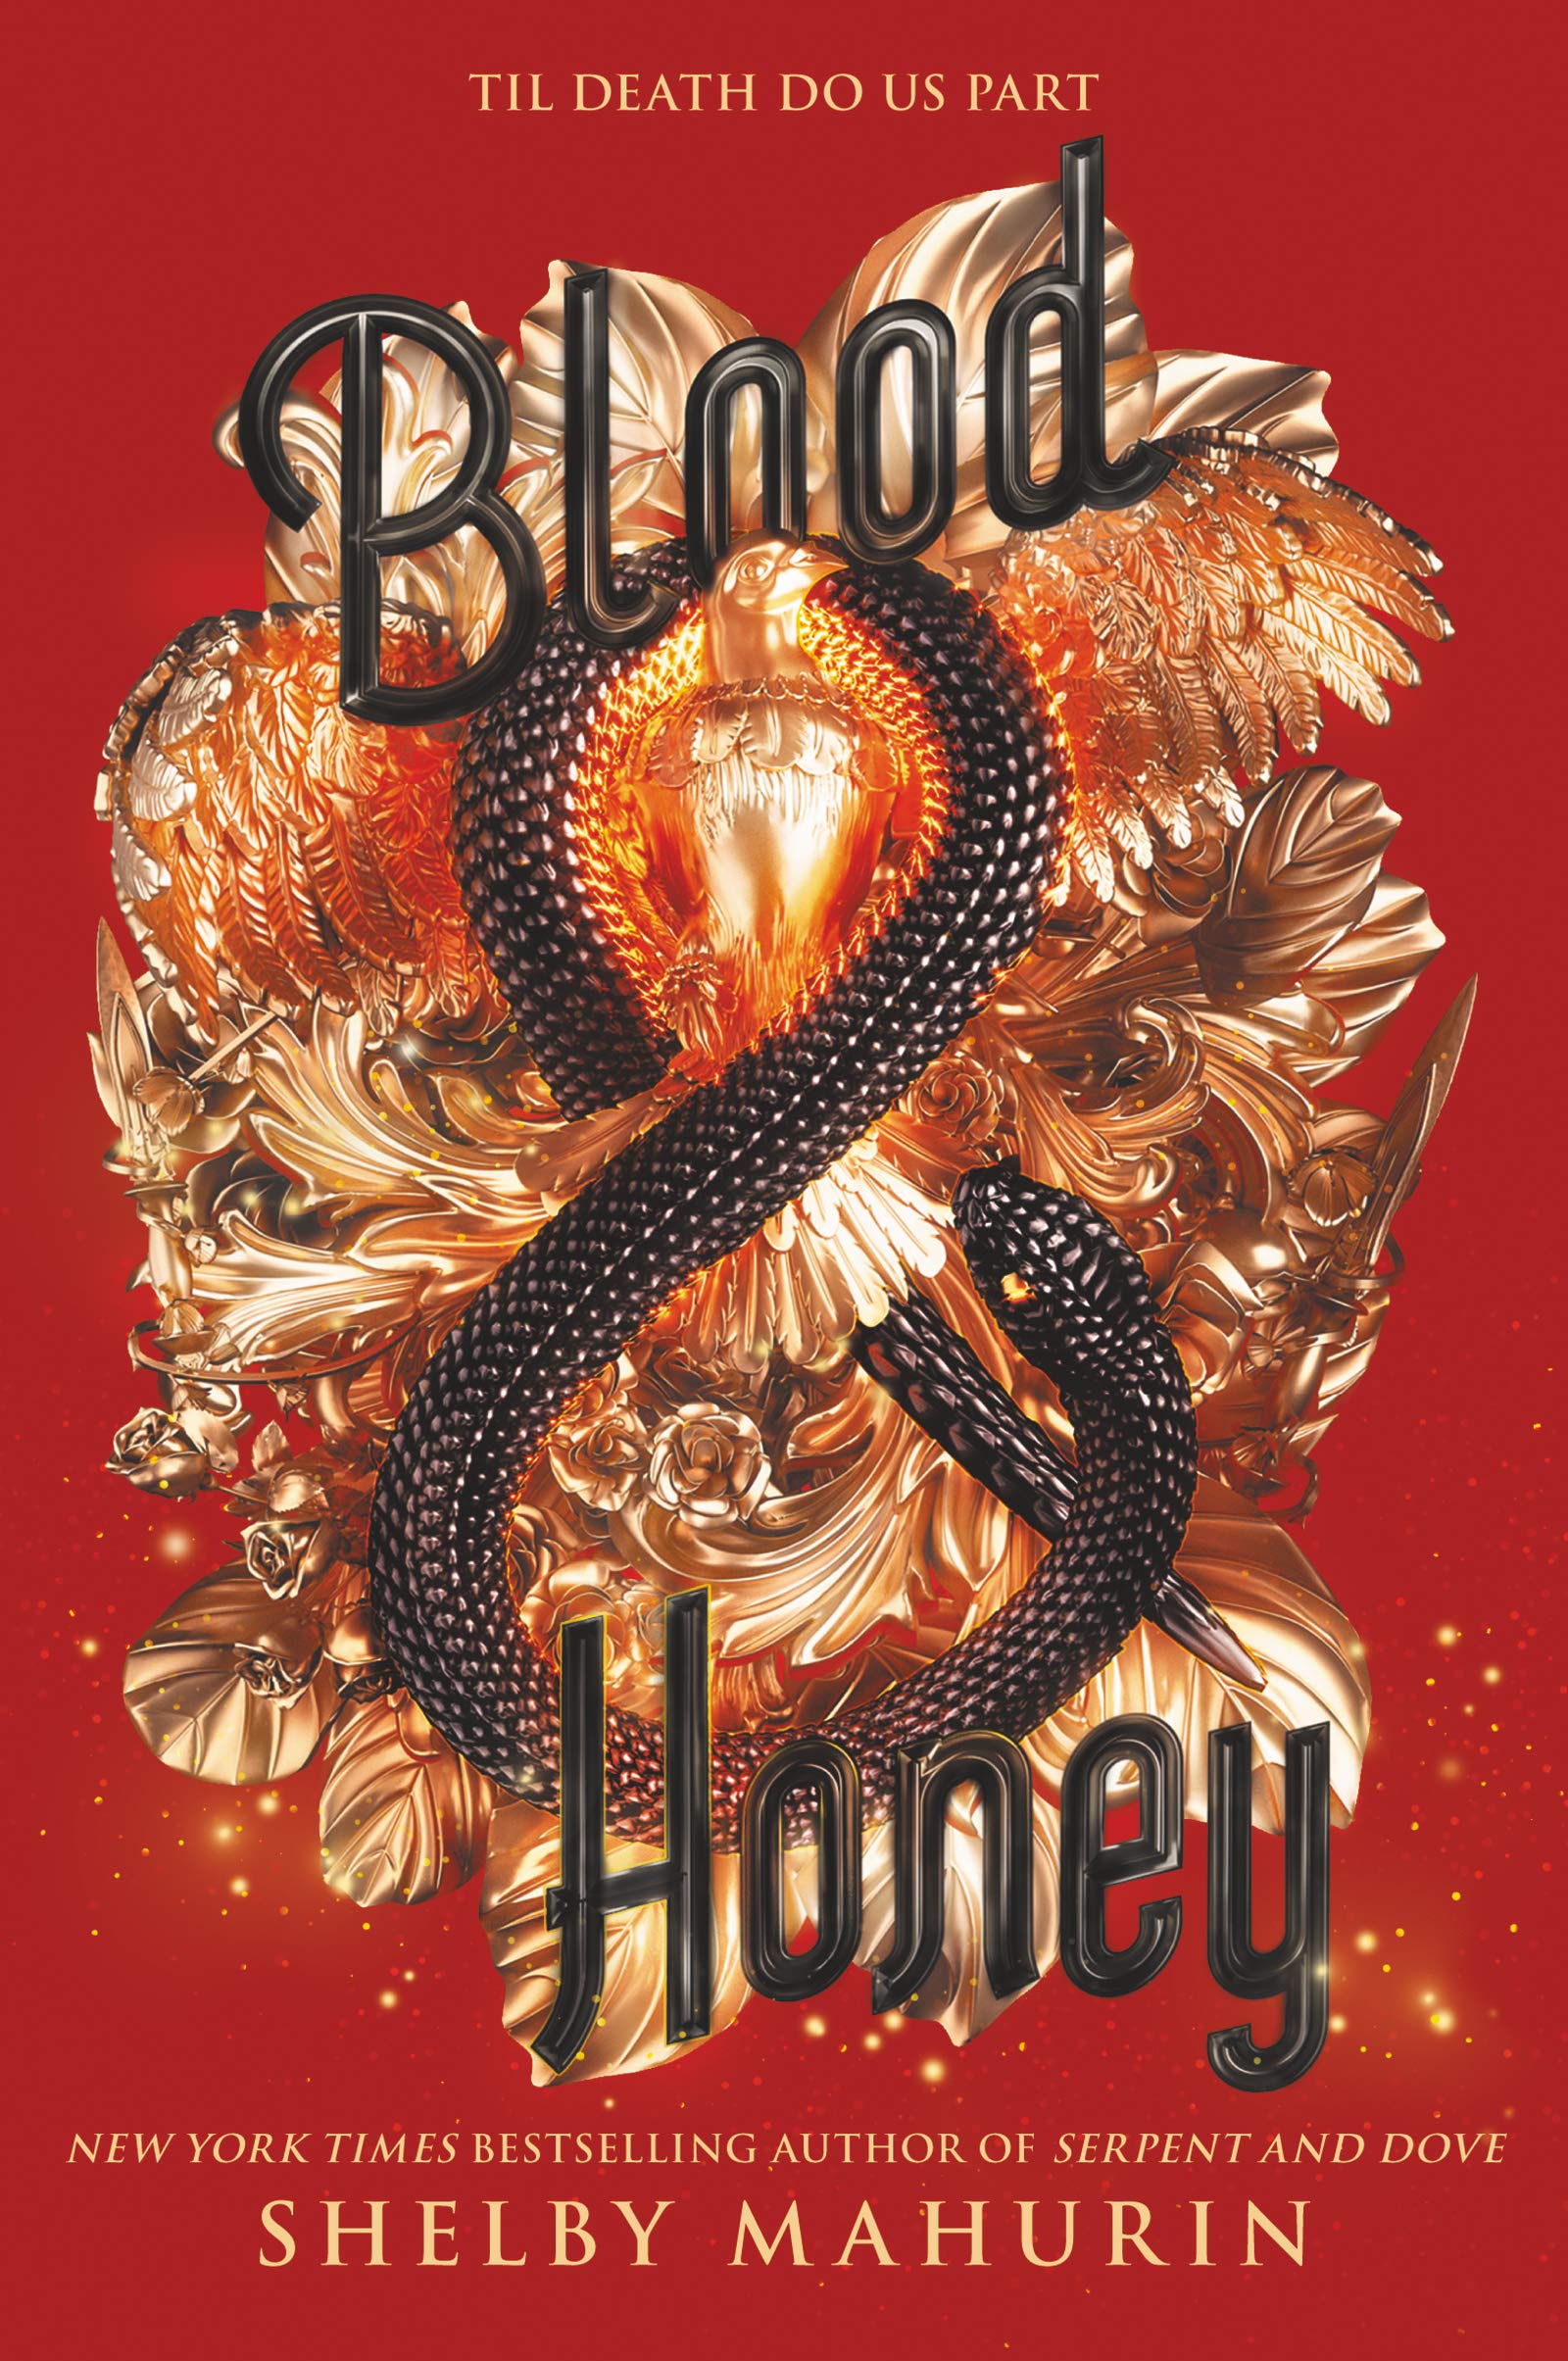 Serpent and Dove 2: Blood and Honey